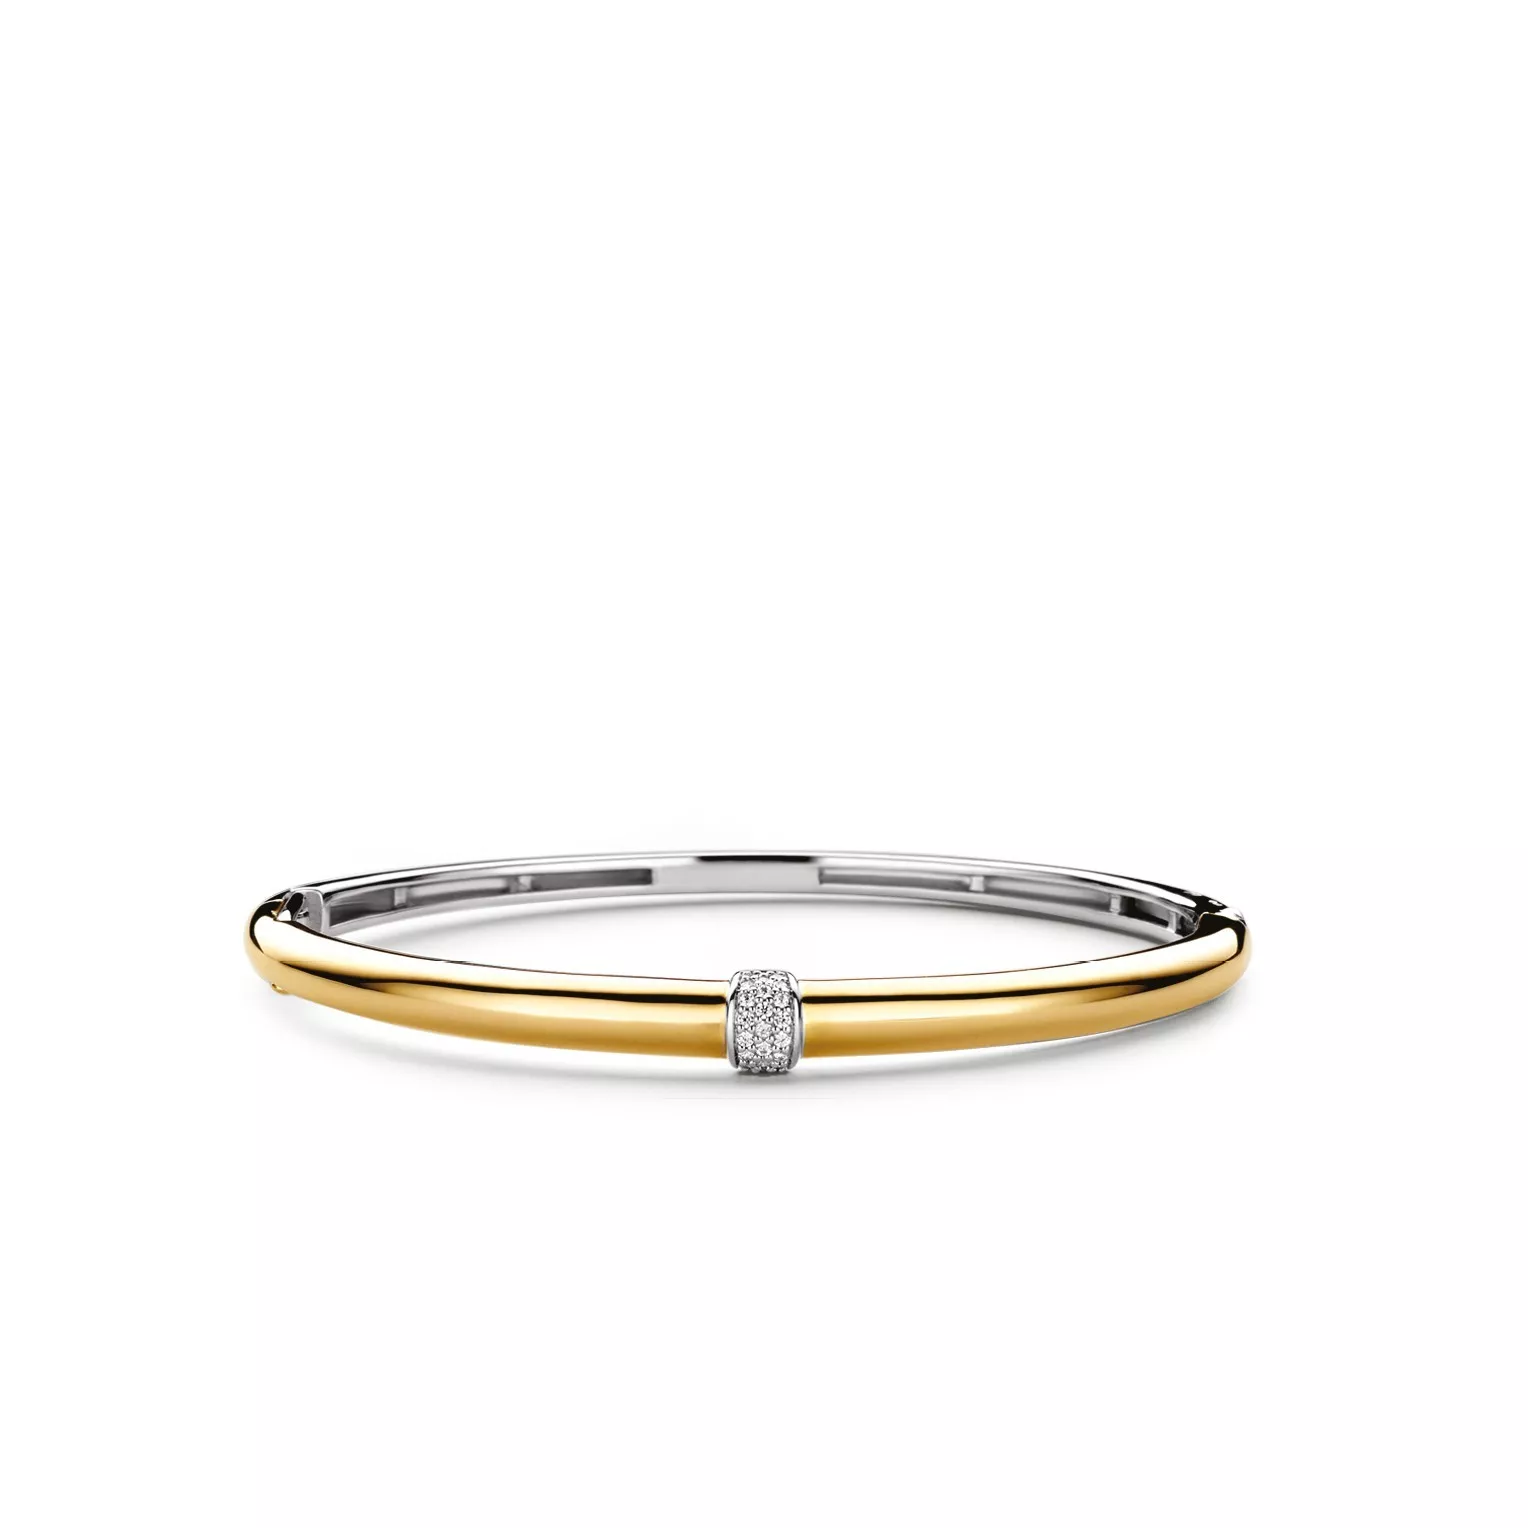 TI SENTO - Milano Armband 2913ZY Zilver gold plated 